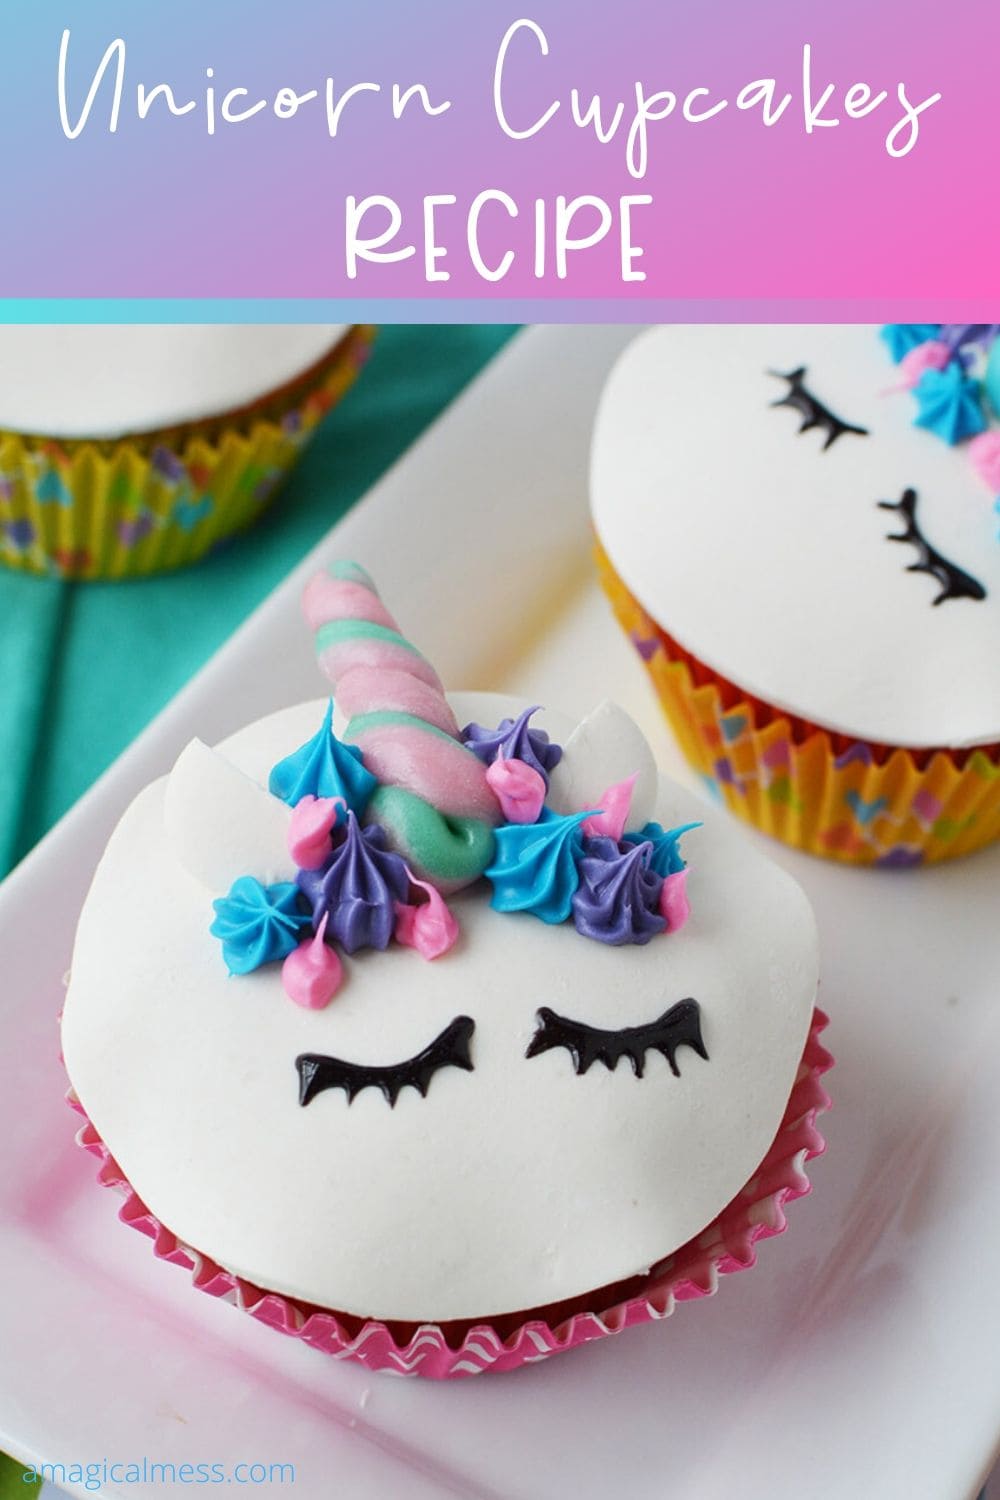 Unicorn face cupcakes with horns